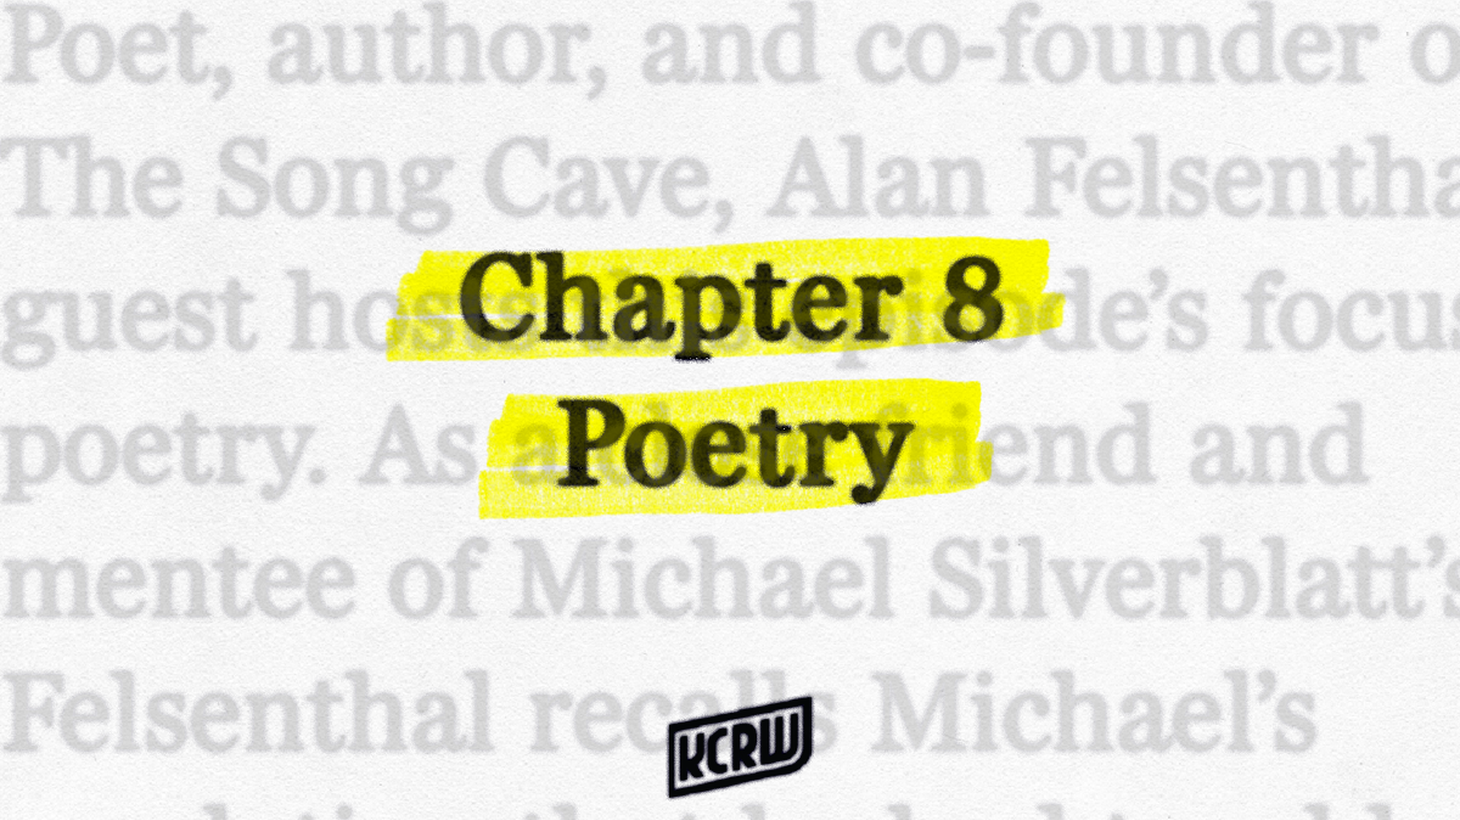 Poet, author, and co-founder of The Song Cave, Alan Felsenthal guest hosts this episode’s focus on poetry. As a close friend and mentee of Michael Silverblatt’s, Felsenthal recalls Michael’s revelation that he had trouble finding his way into poetry until he had several formative experiences, including one he described in 2019 during a Walt Whitman tribute. We’ll hear from that tribute with poet Pattiann Rogers reading Whitman. We’ll also hear from poets John Ashbery, Coral Bracho, Forrest Gander, and Lucille Clifton.